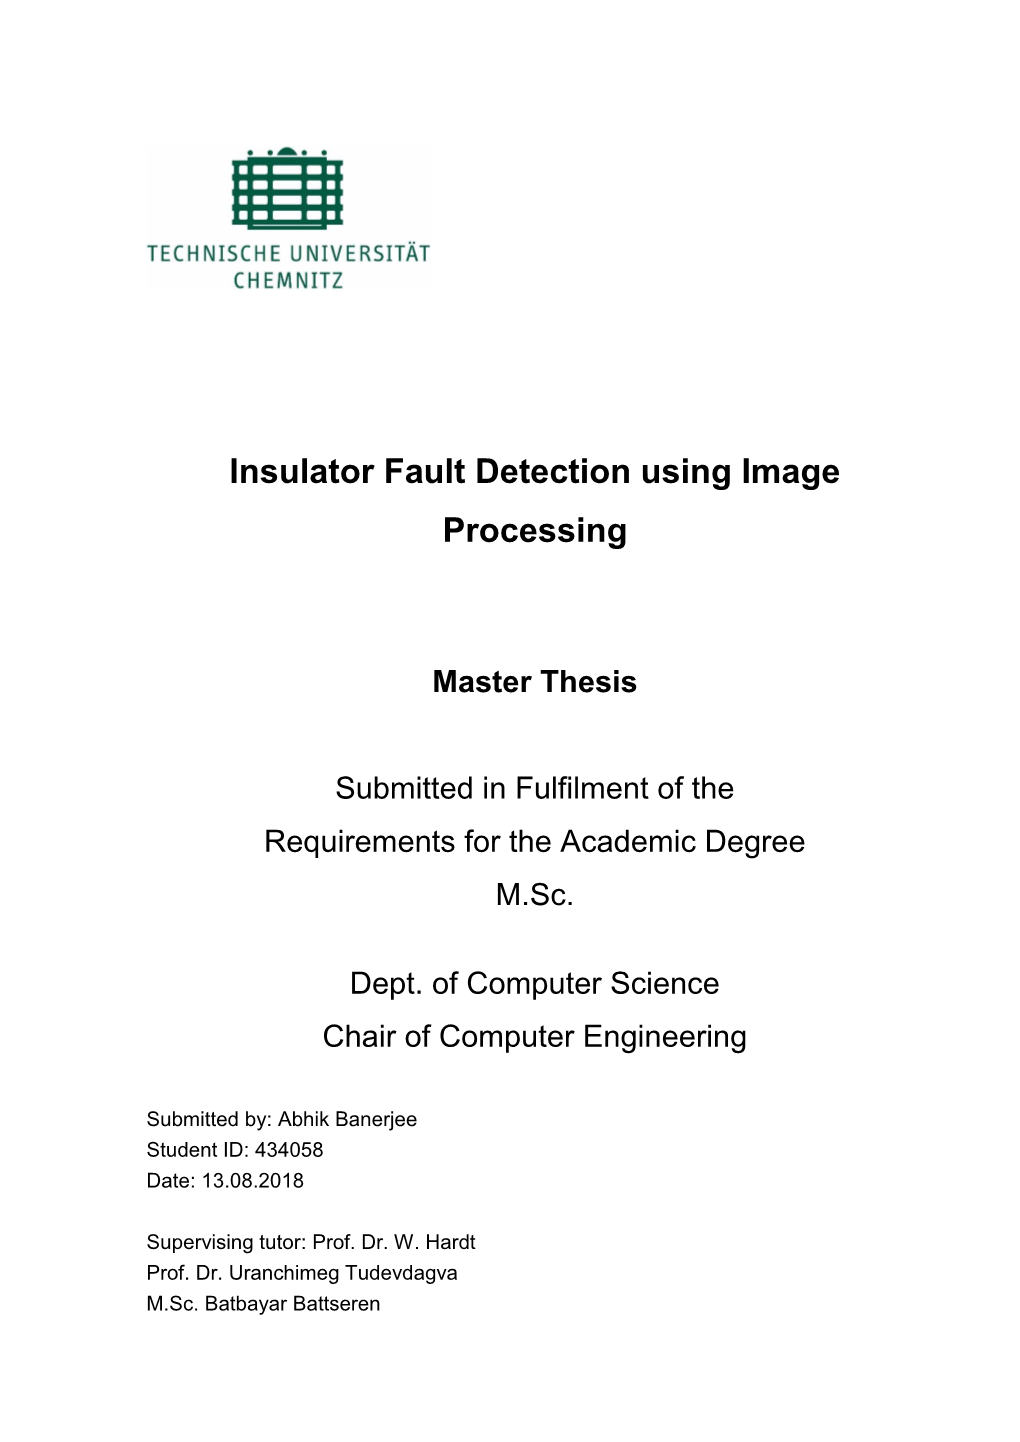 Insulator Fault Detection Using Image Processing